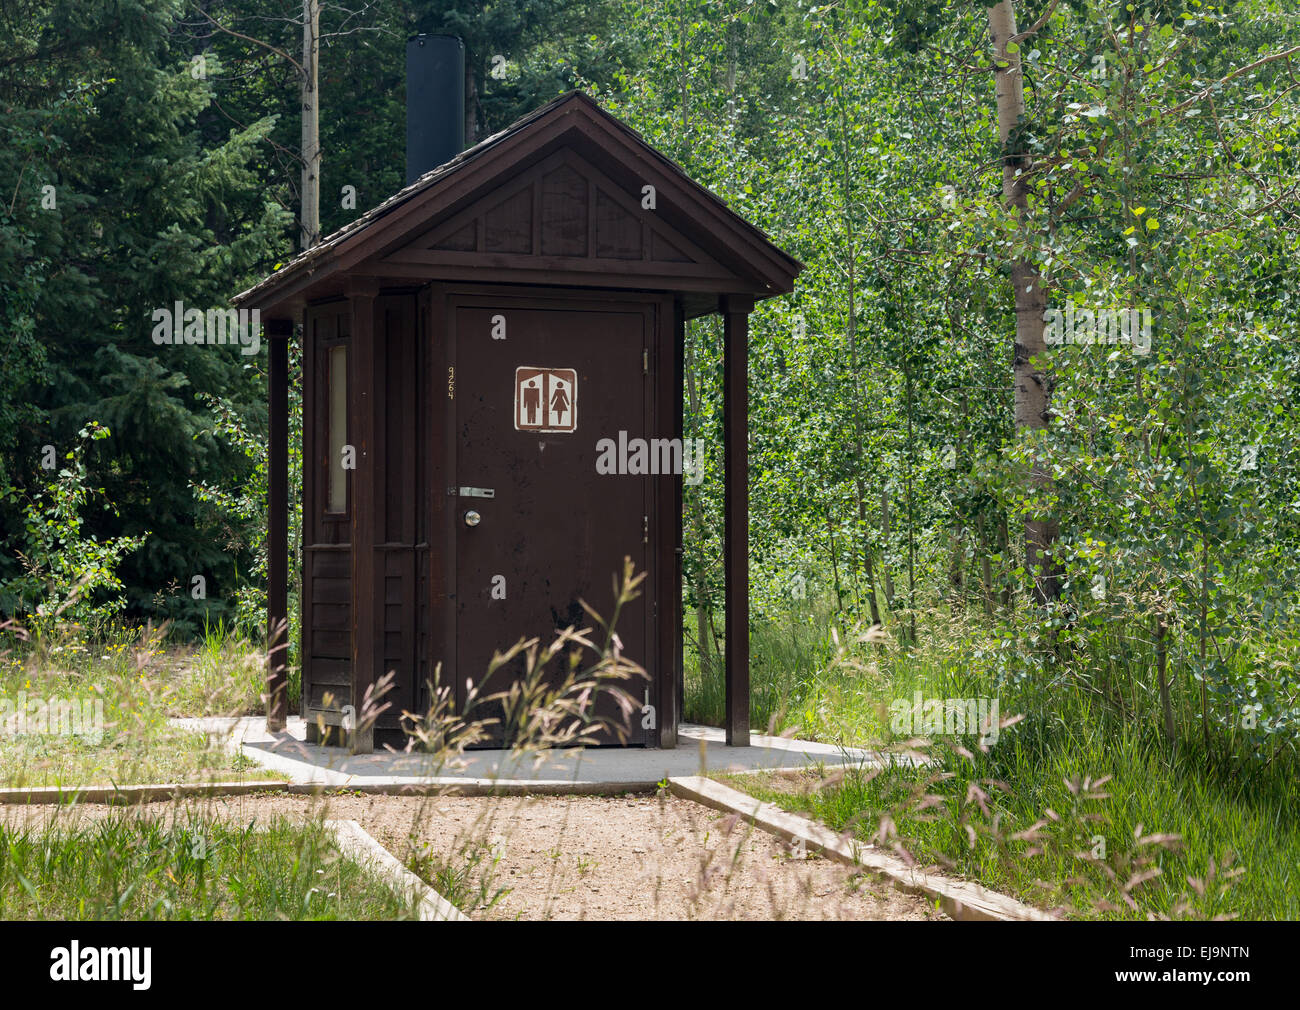 Wooden restroom in forest Stock Photo